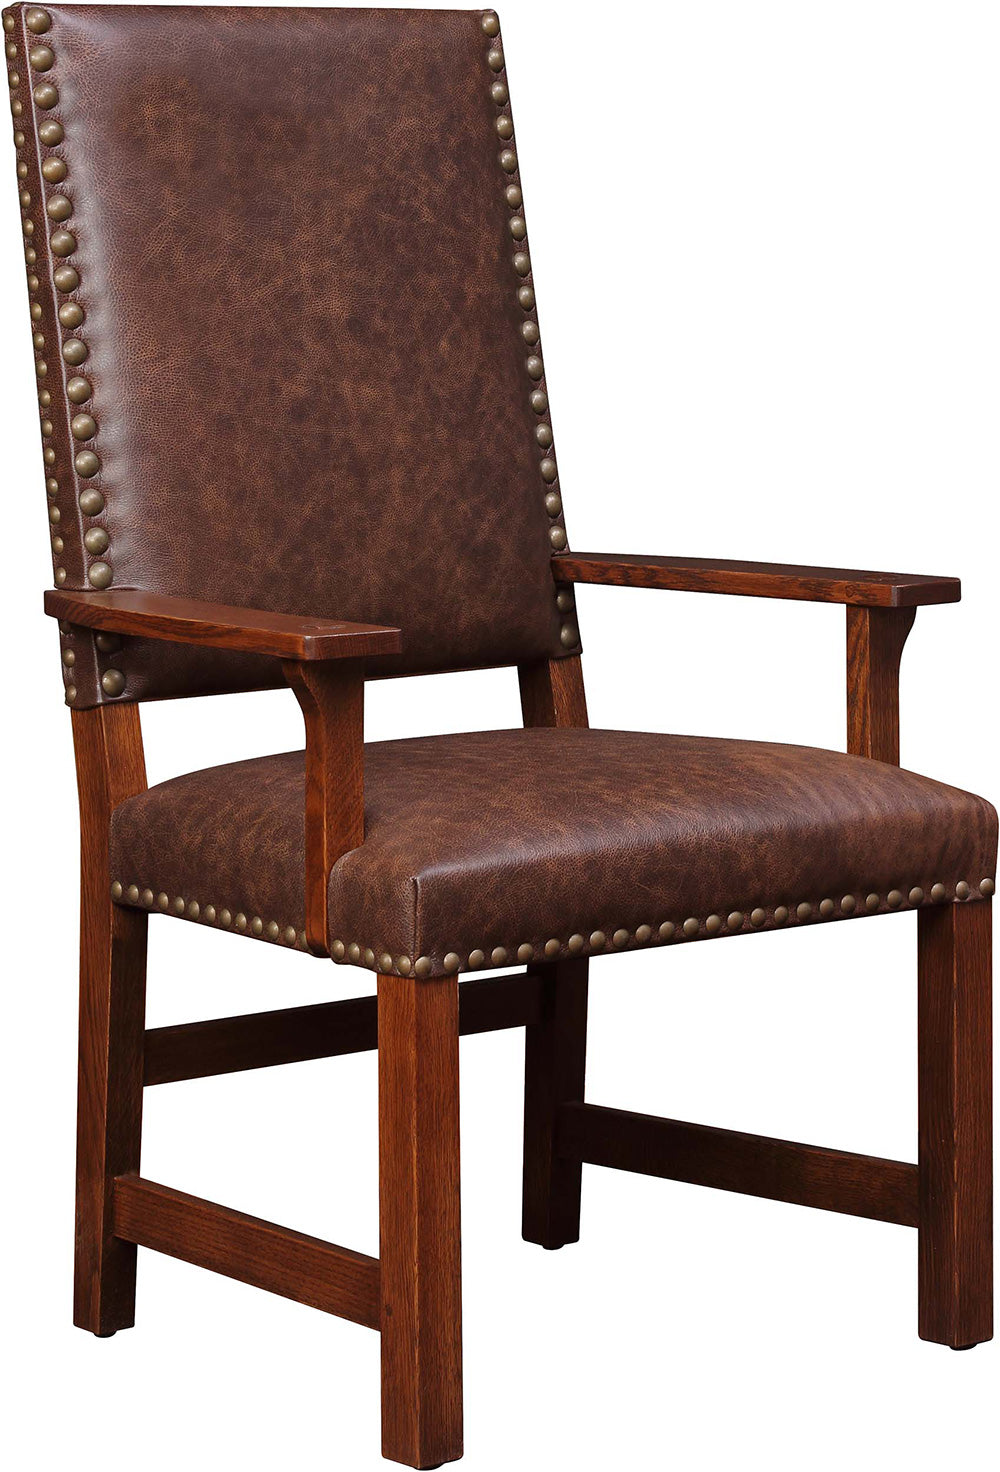 Tall-Back Upholstered Arm Chair - Stickley Brand